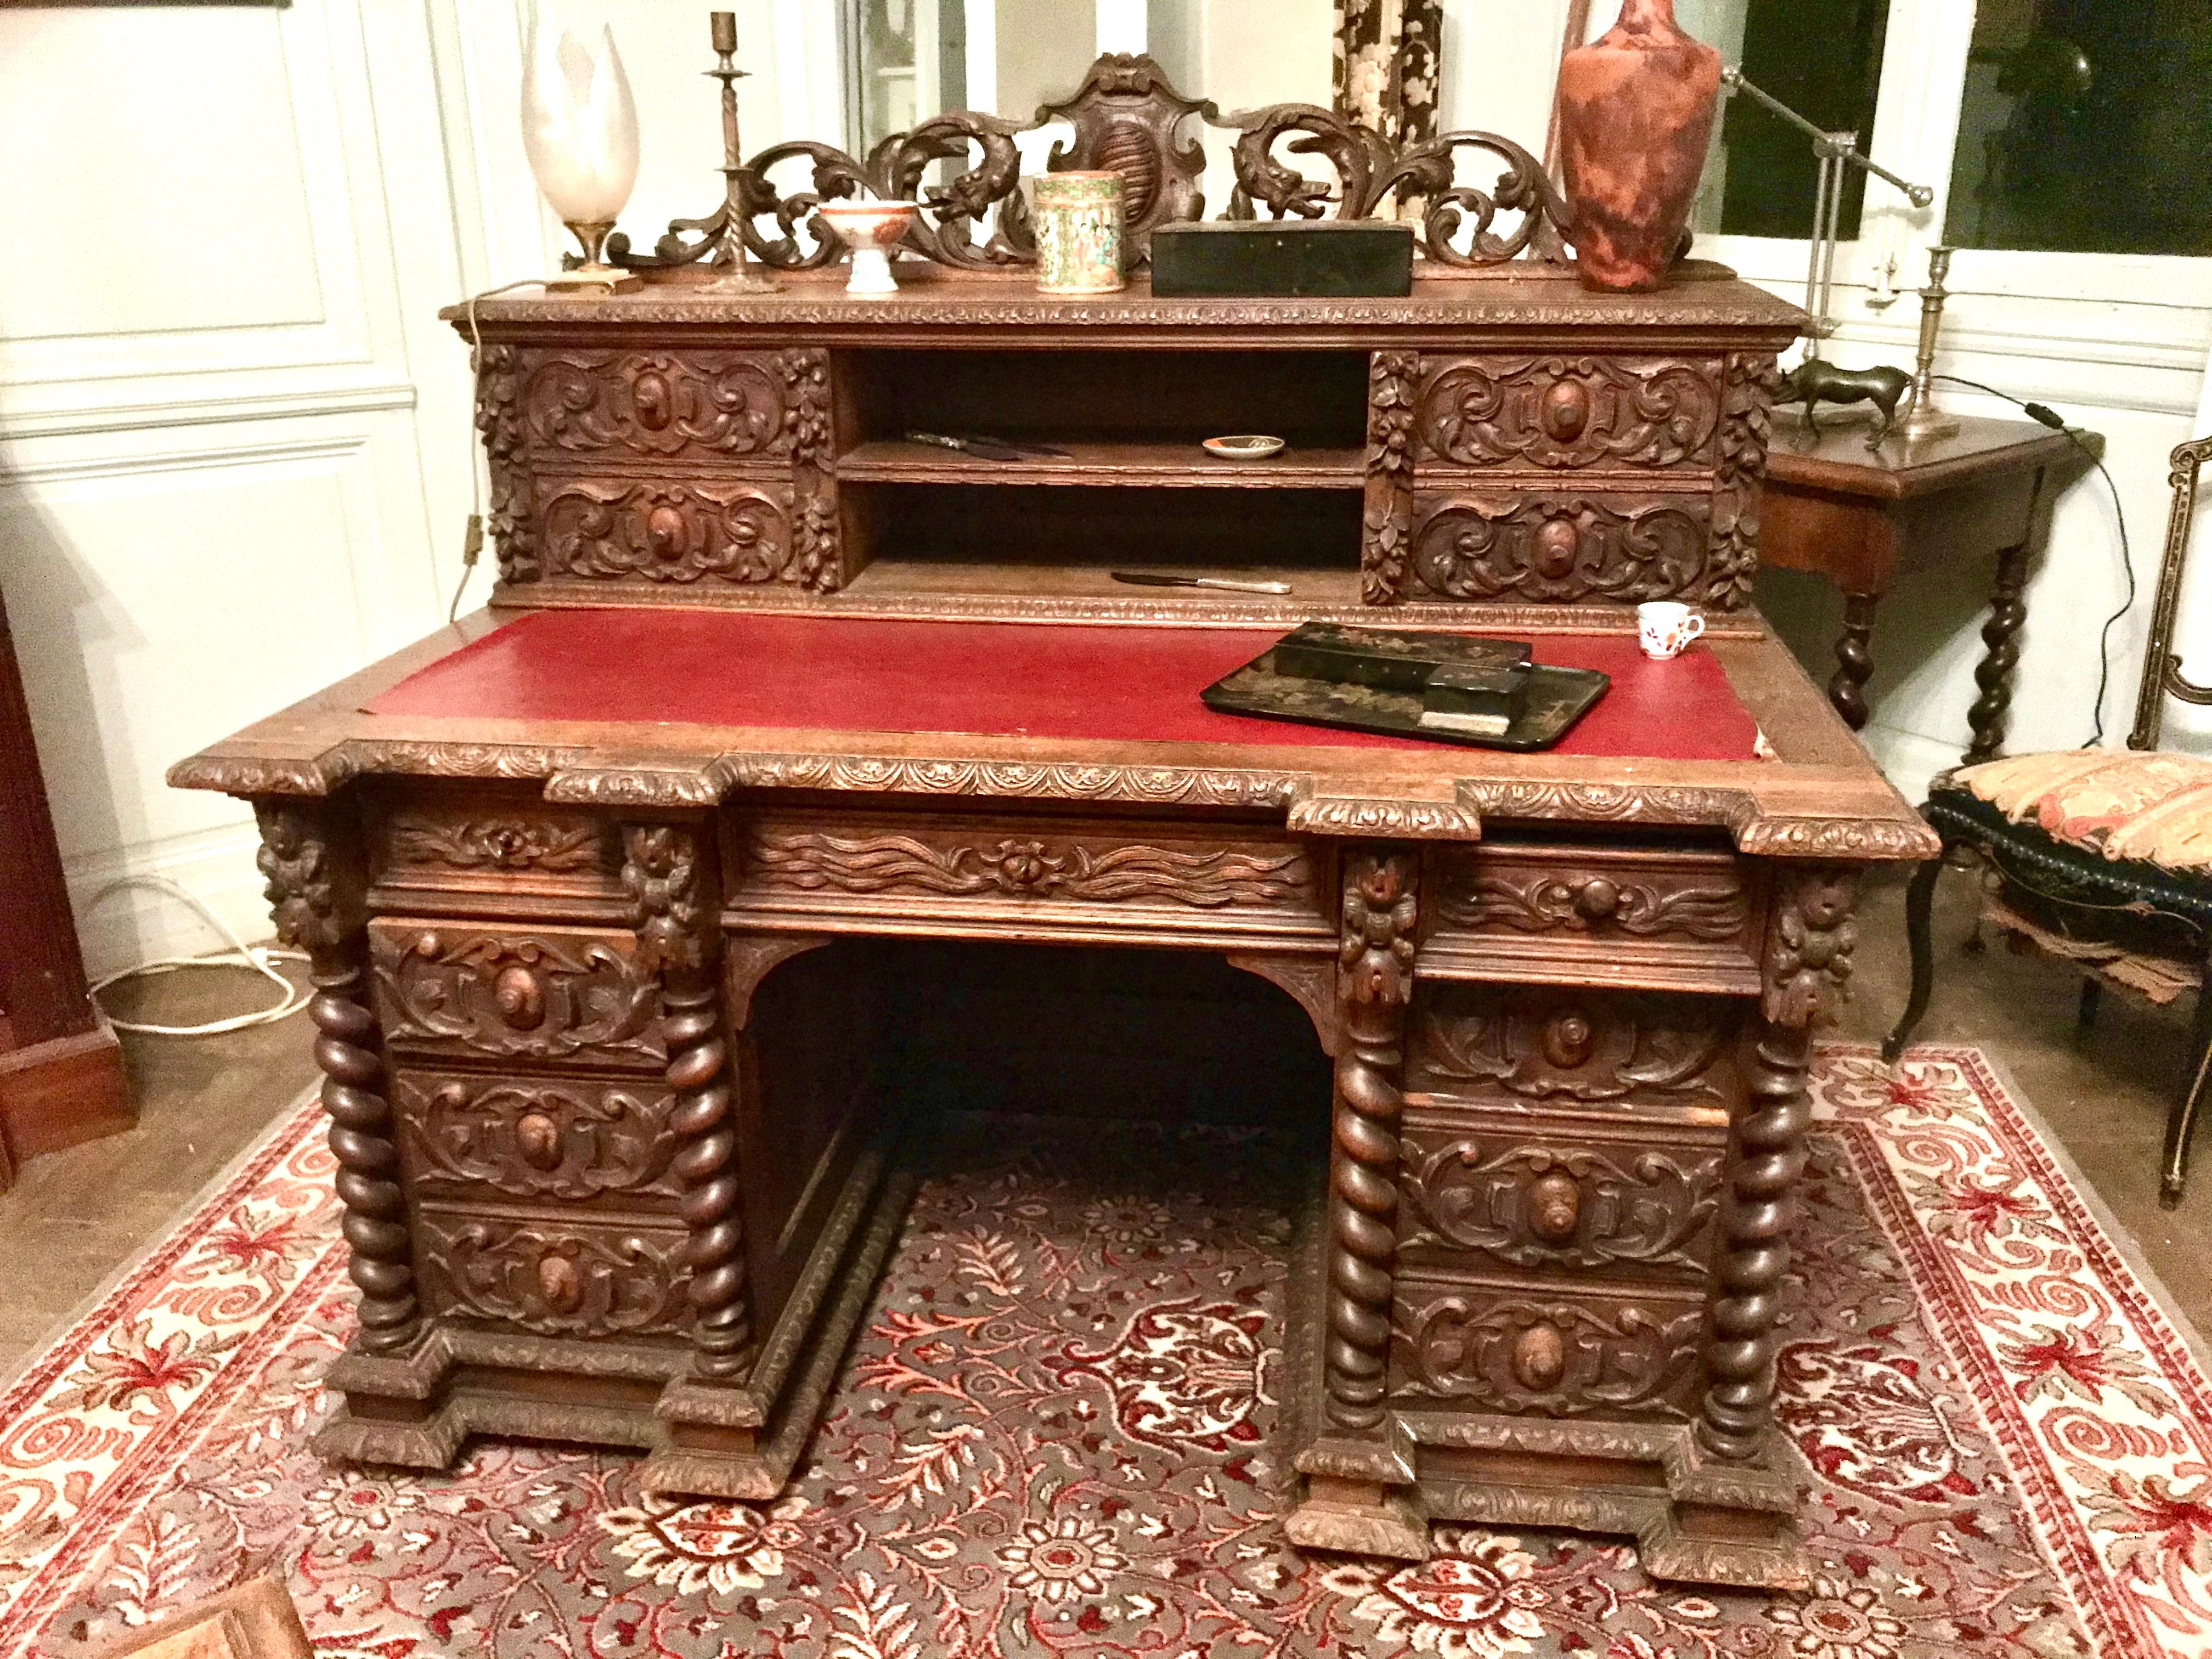 19th Century French Neo-Renaissance Hand-Carved Wooden Desk Henri II Style circa 1870 France